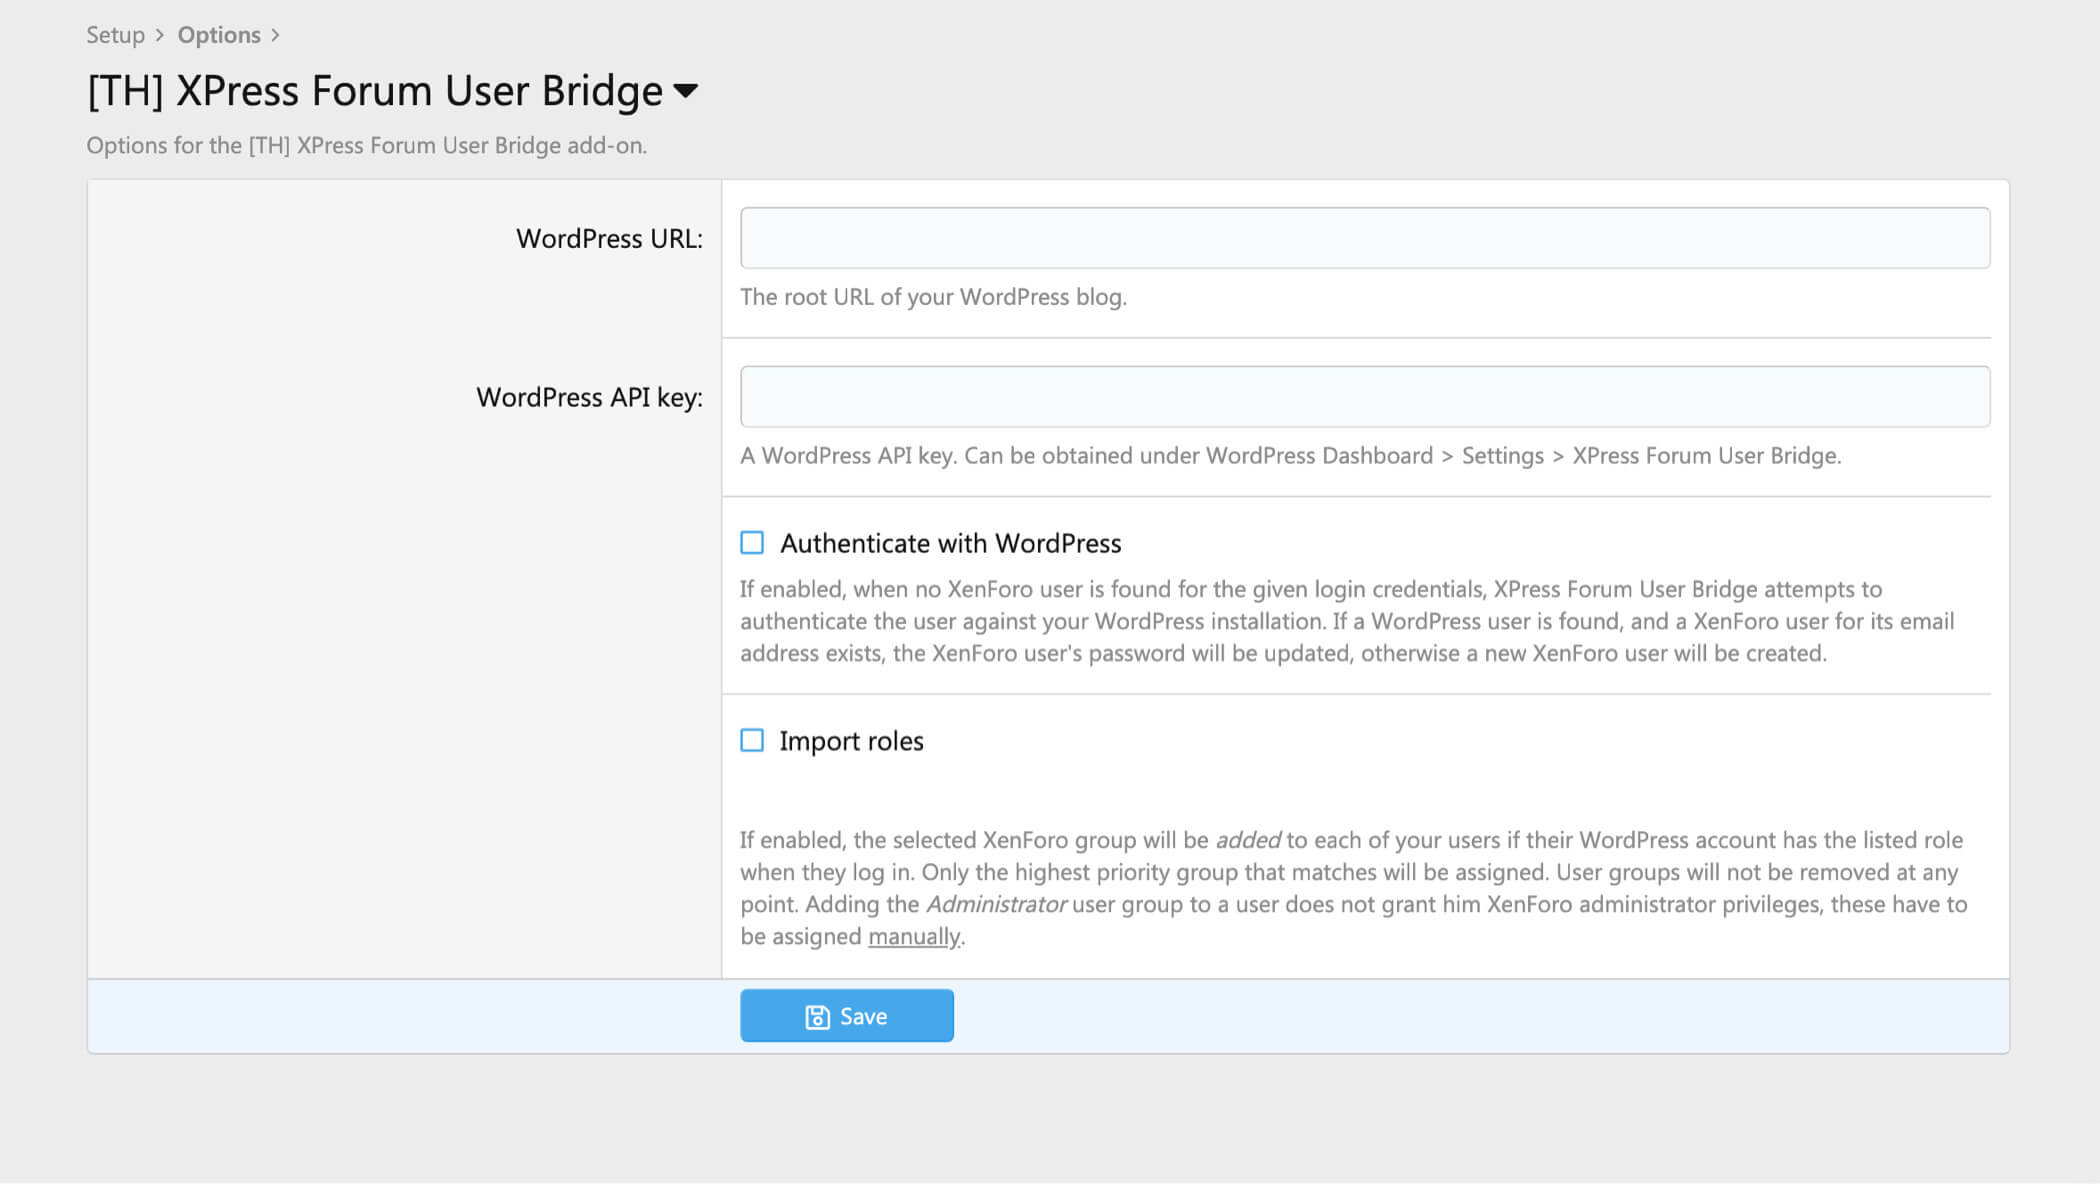 Screenshot of the options section for XPress Forum User Bridge within XenForo under the Options section.